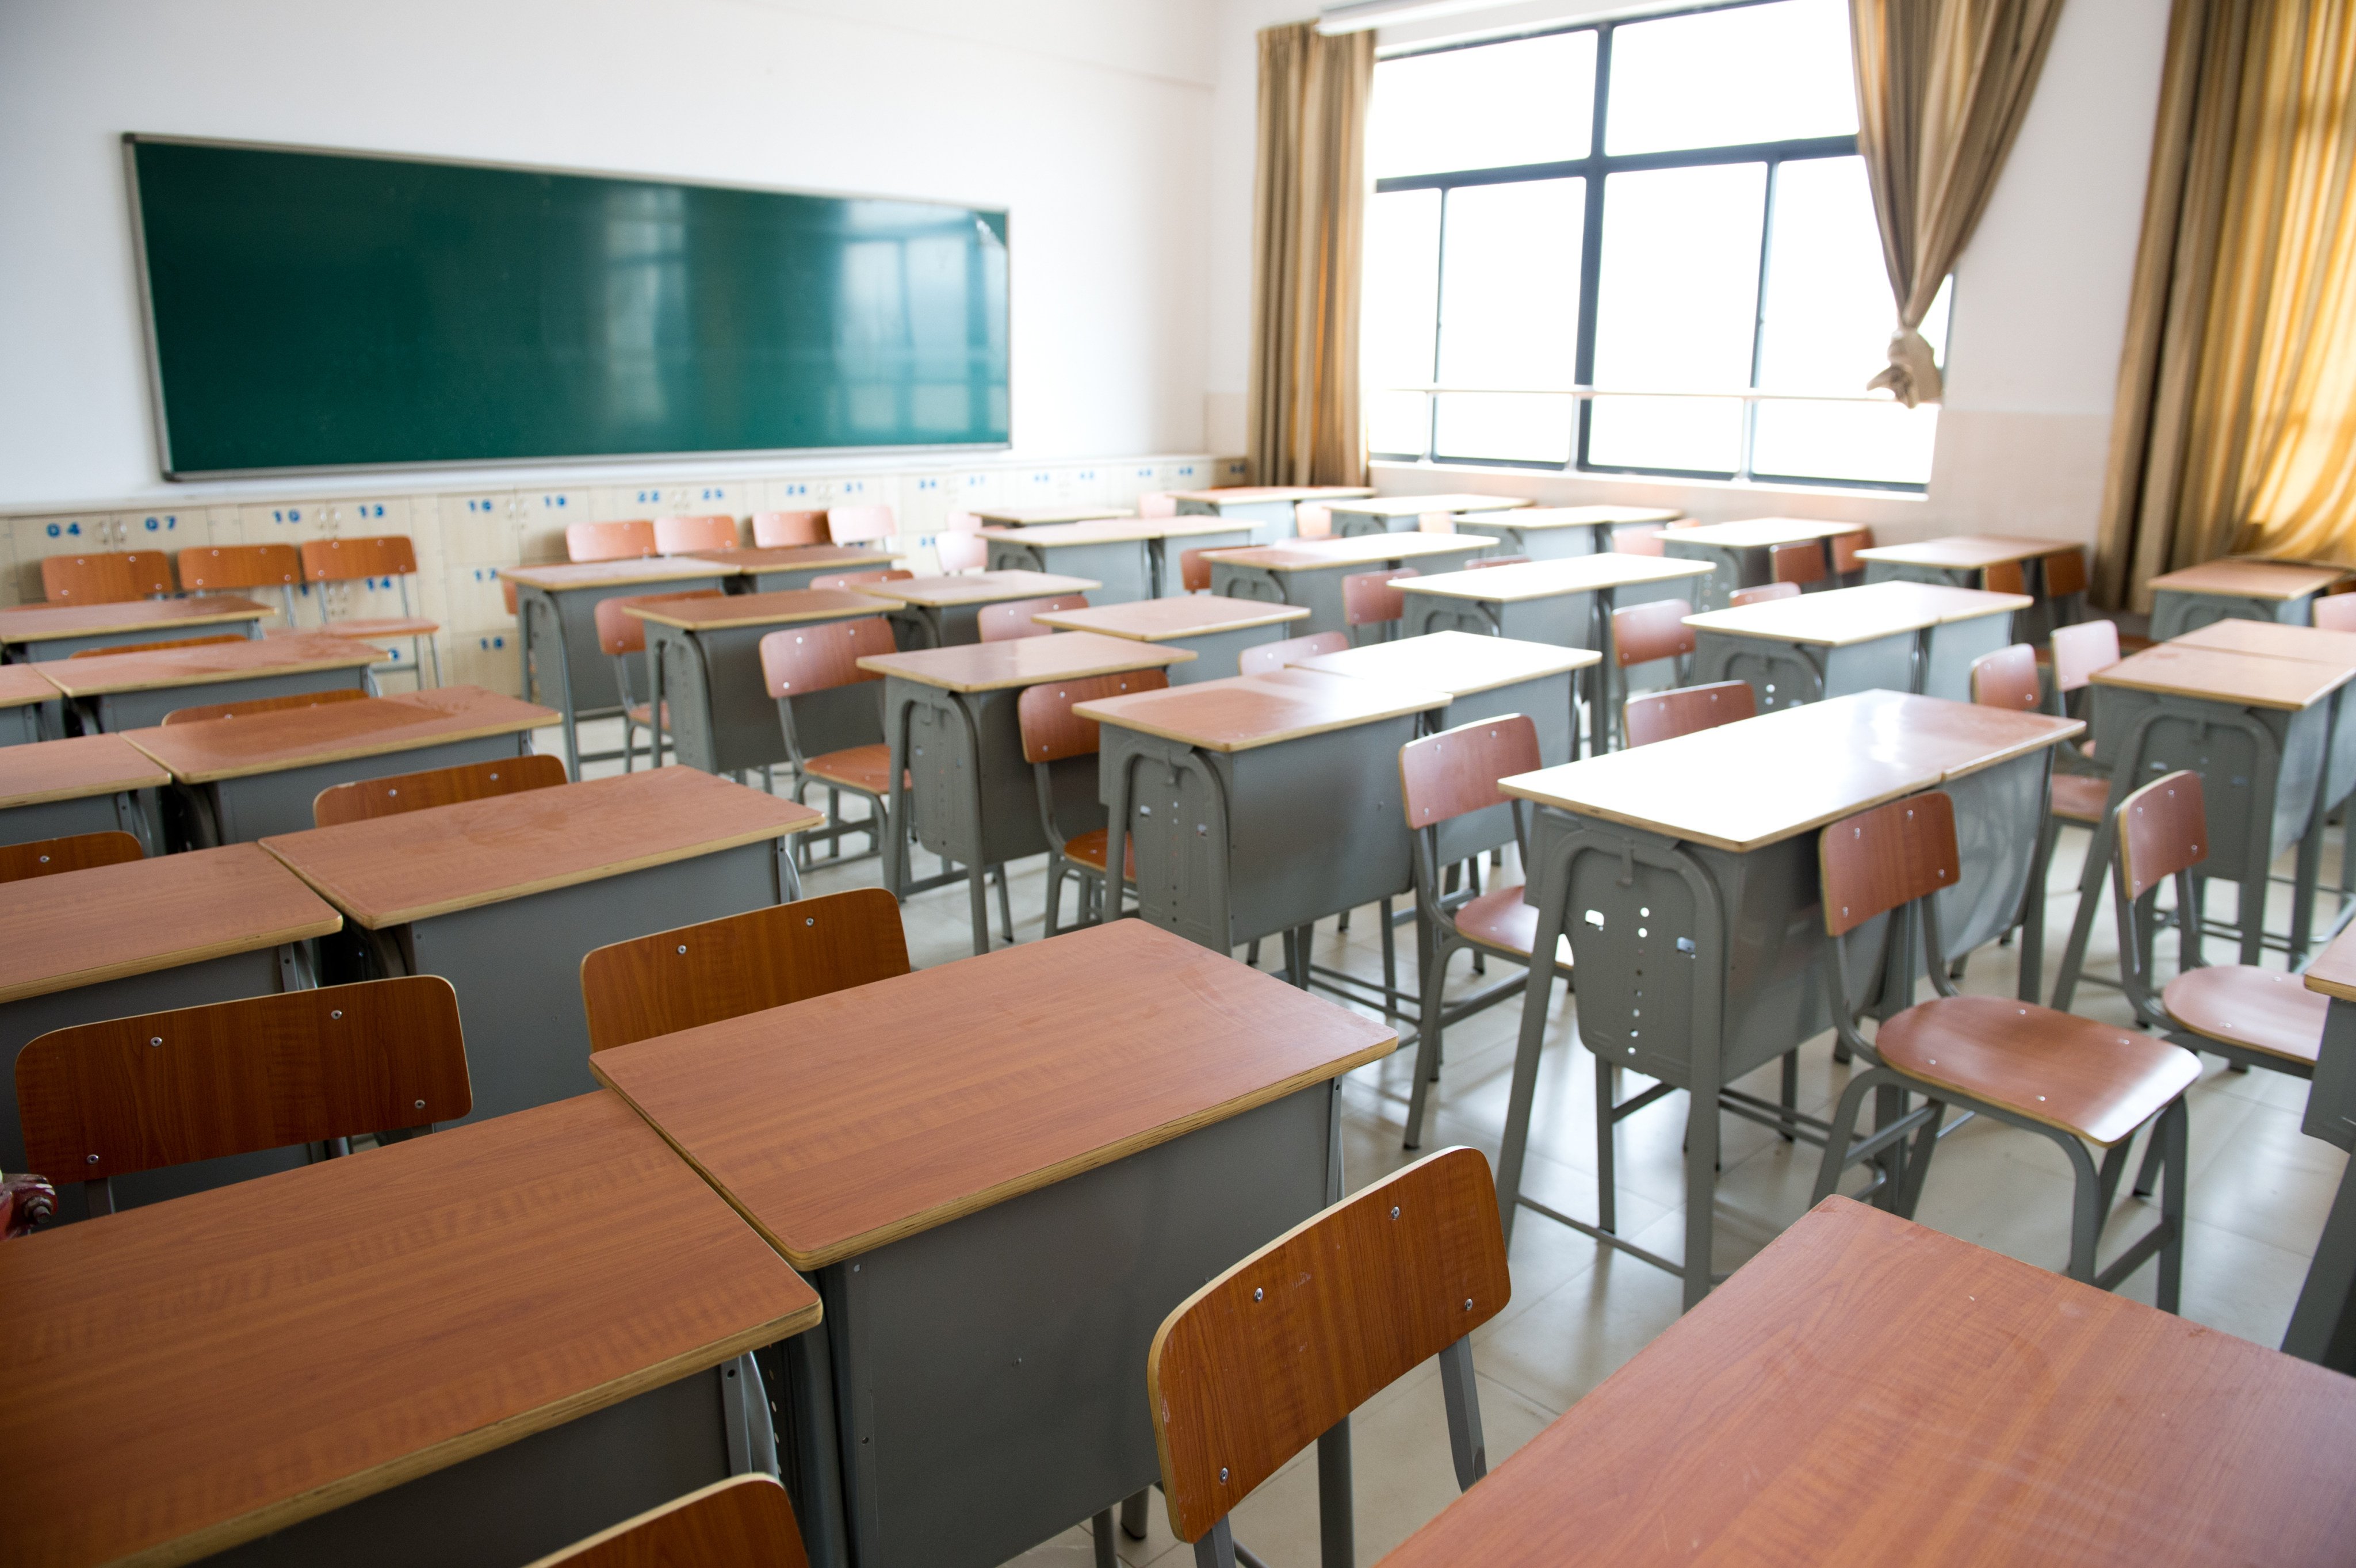 Secondary schools with too few pupils could be closed amid falling school rolls. Photo: Shutterstock